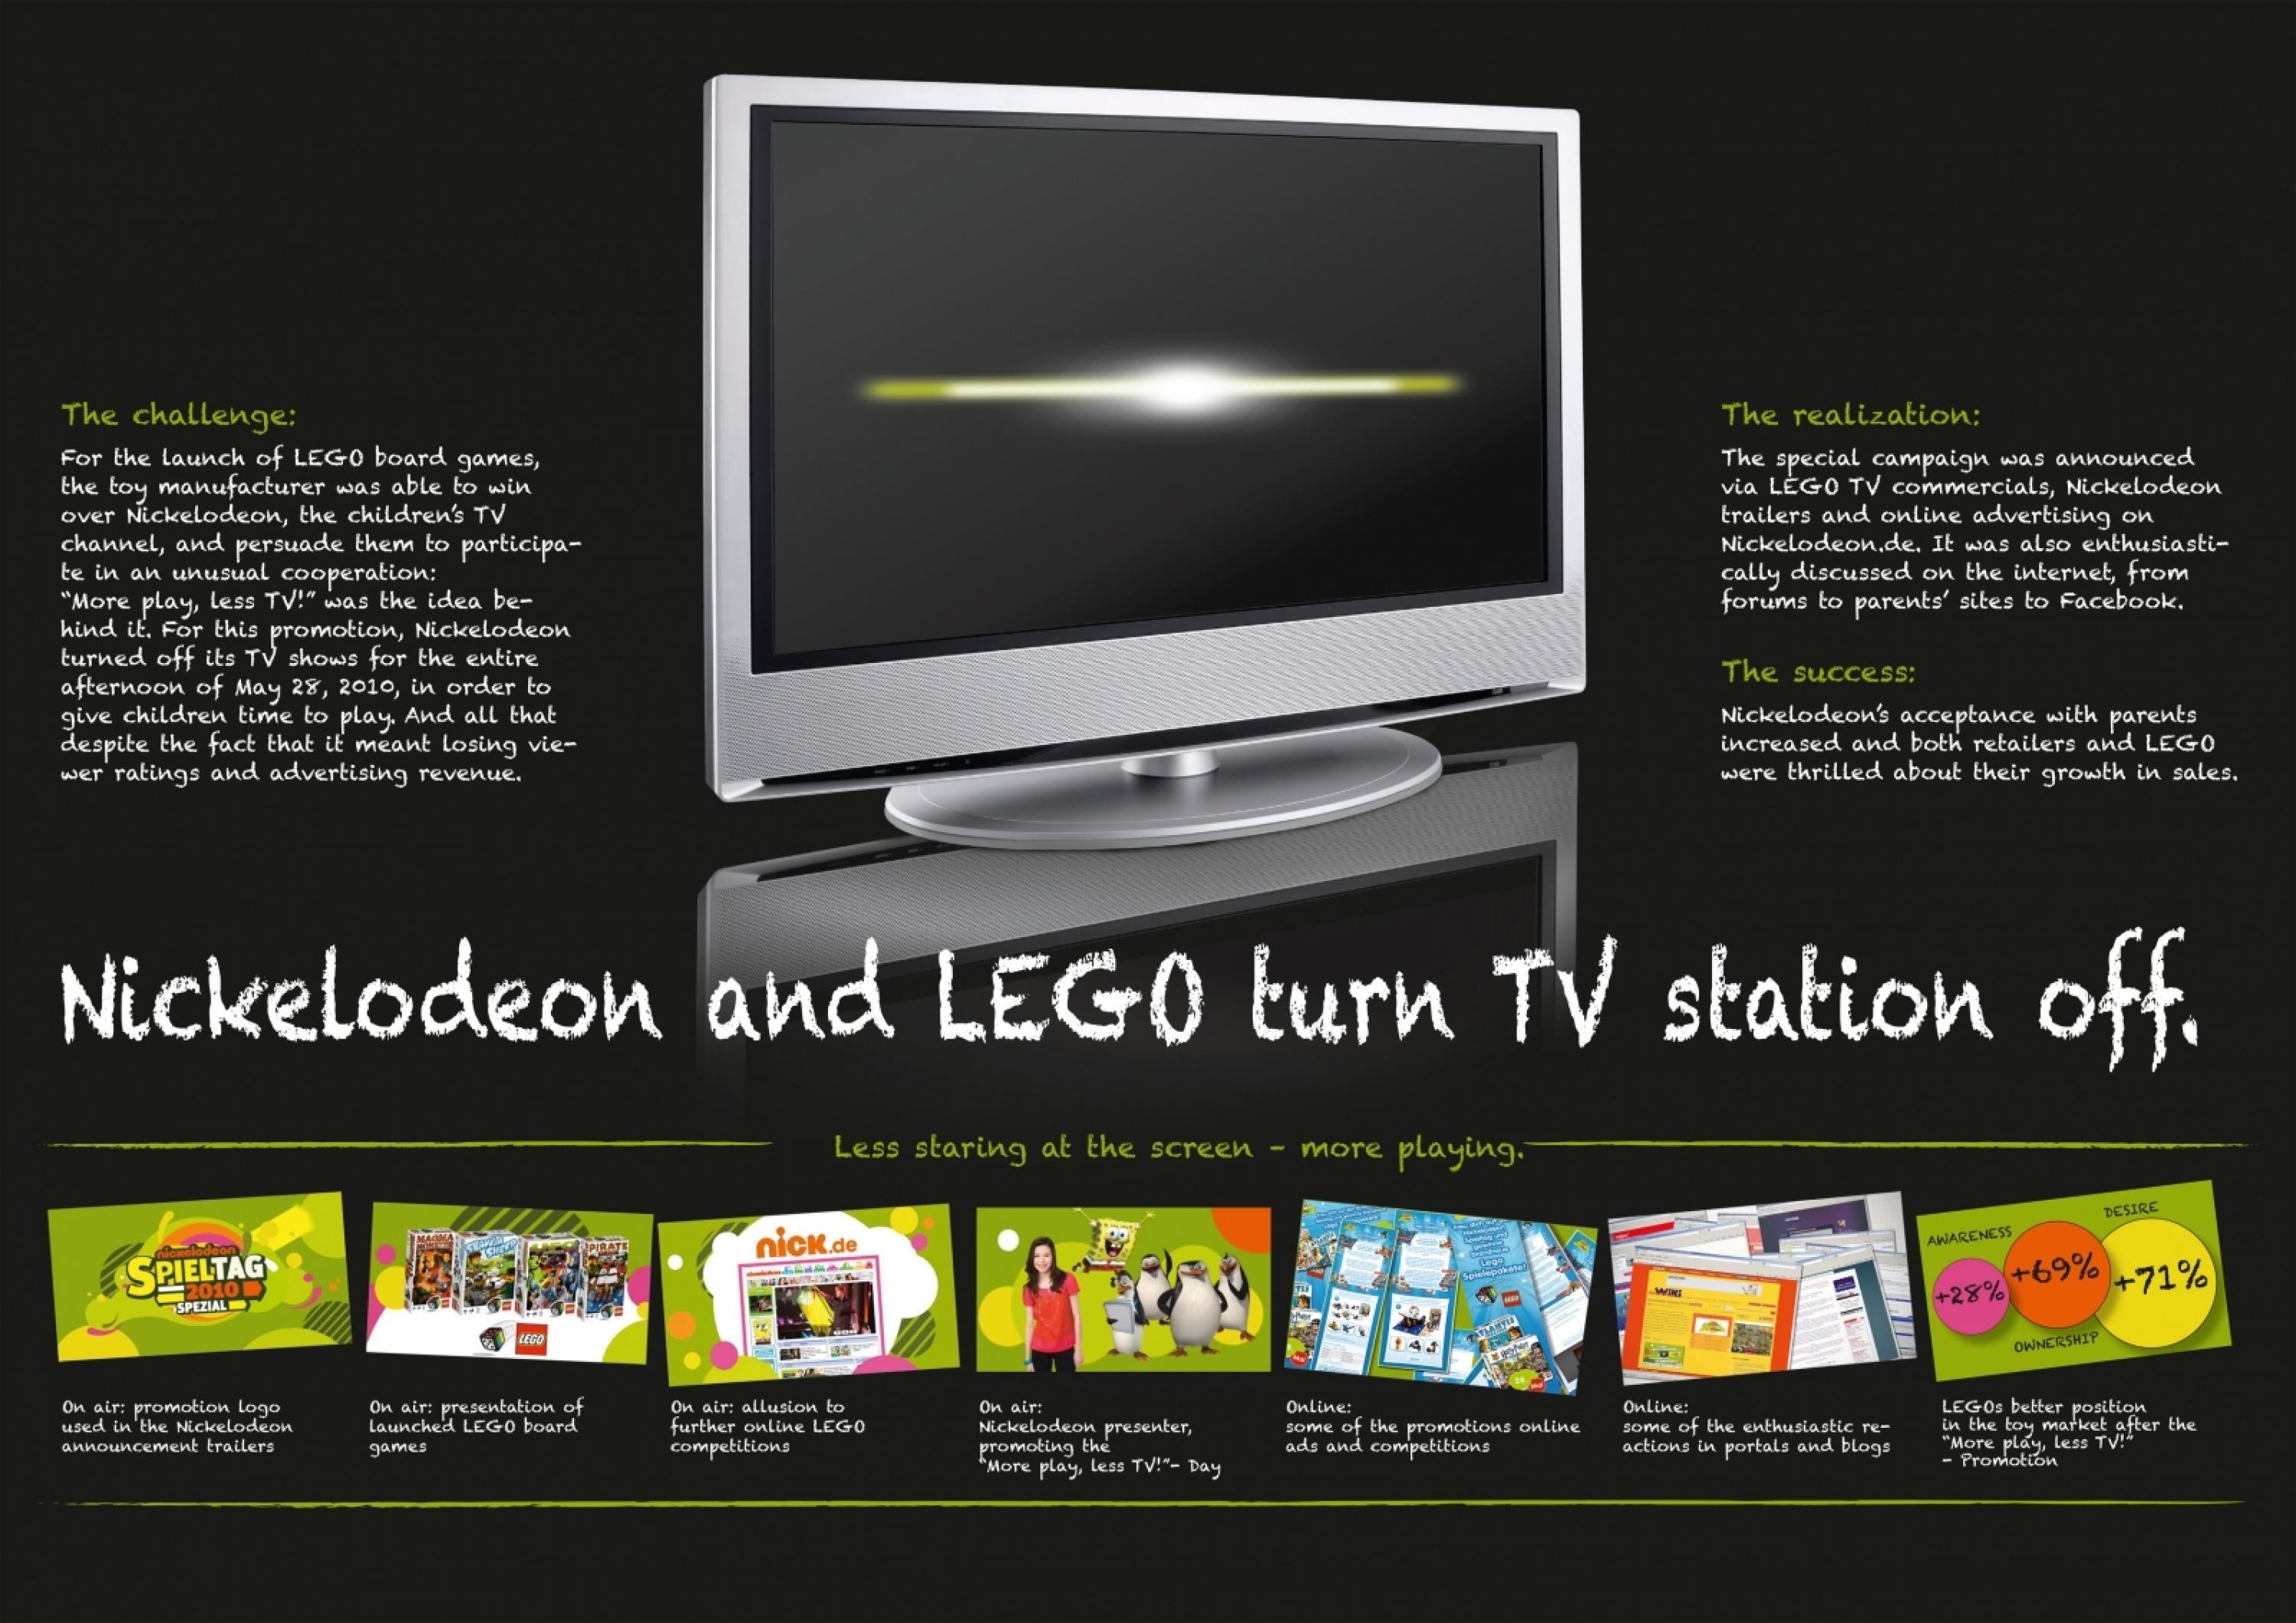 NICKELODEON AND LEGO TURN TV STATION OFF